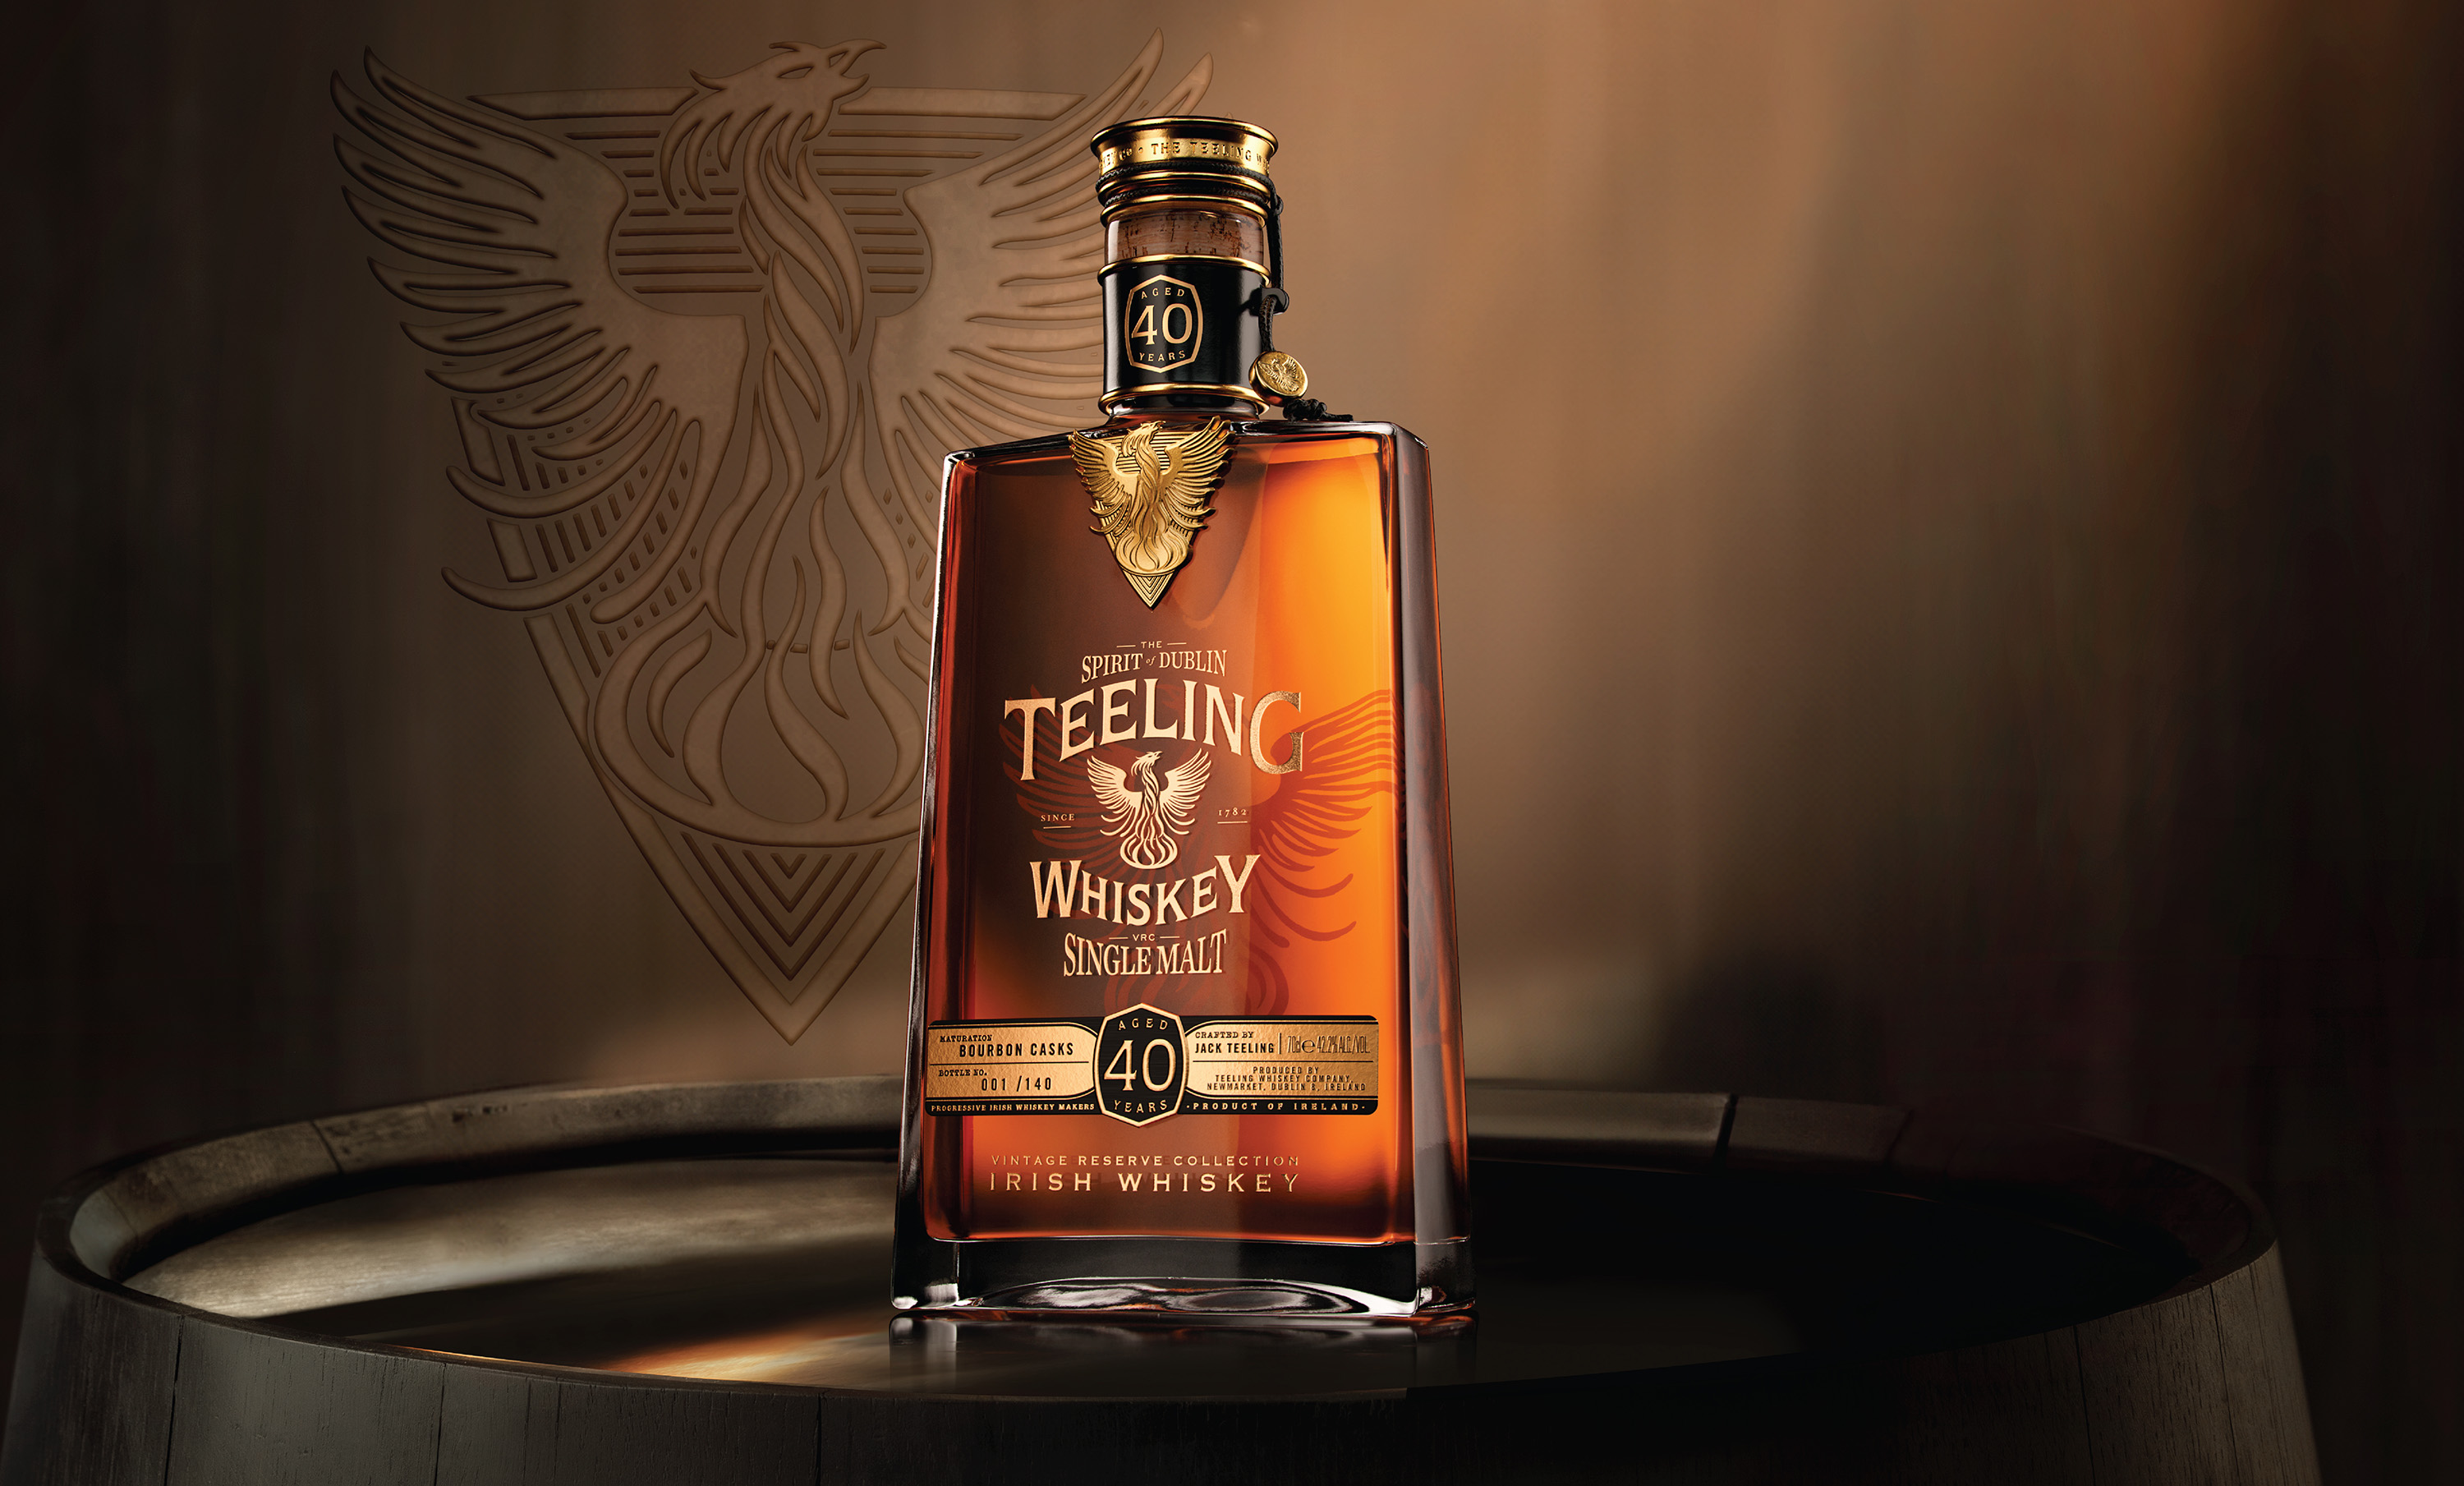 Brand Hatch Creative Craft the Design for Teeling Whiskey 40 Year Old Single Malt Packaging Design